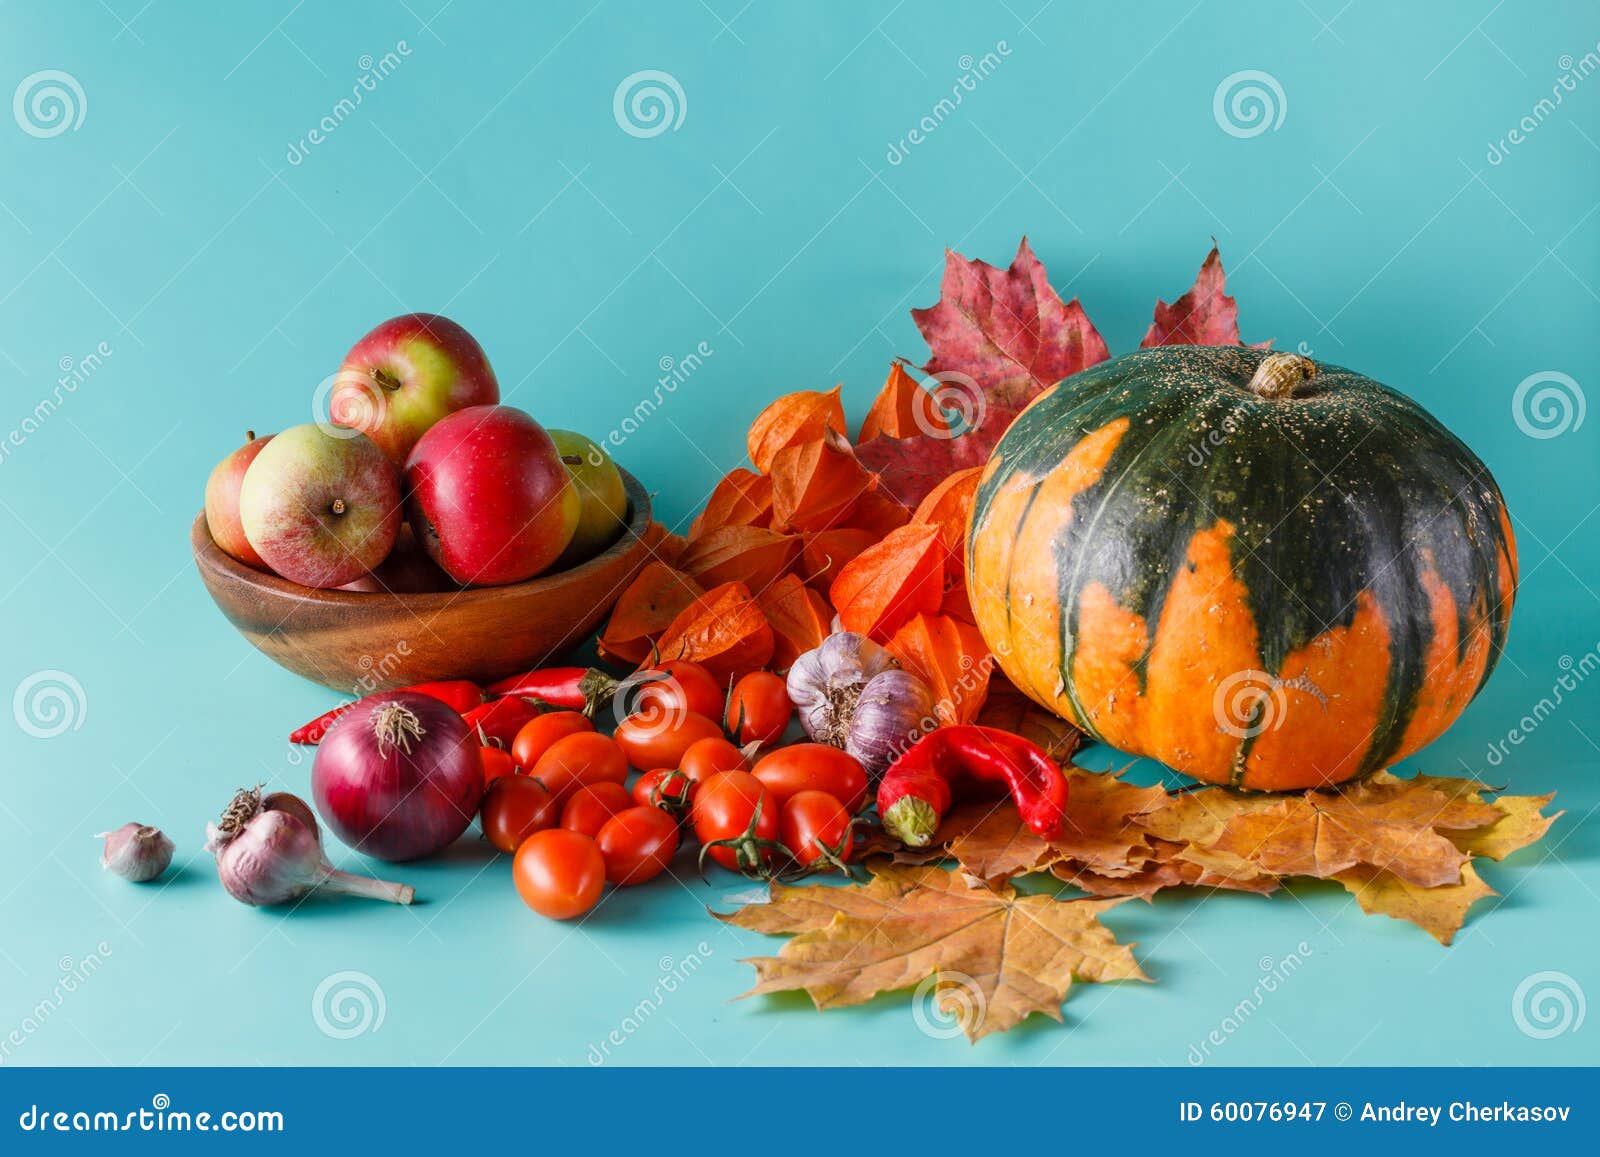 colored pumpkin and fapples on aquamarine shadowless background